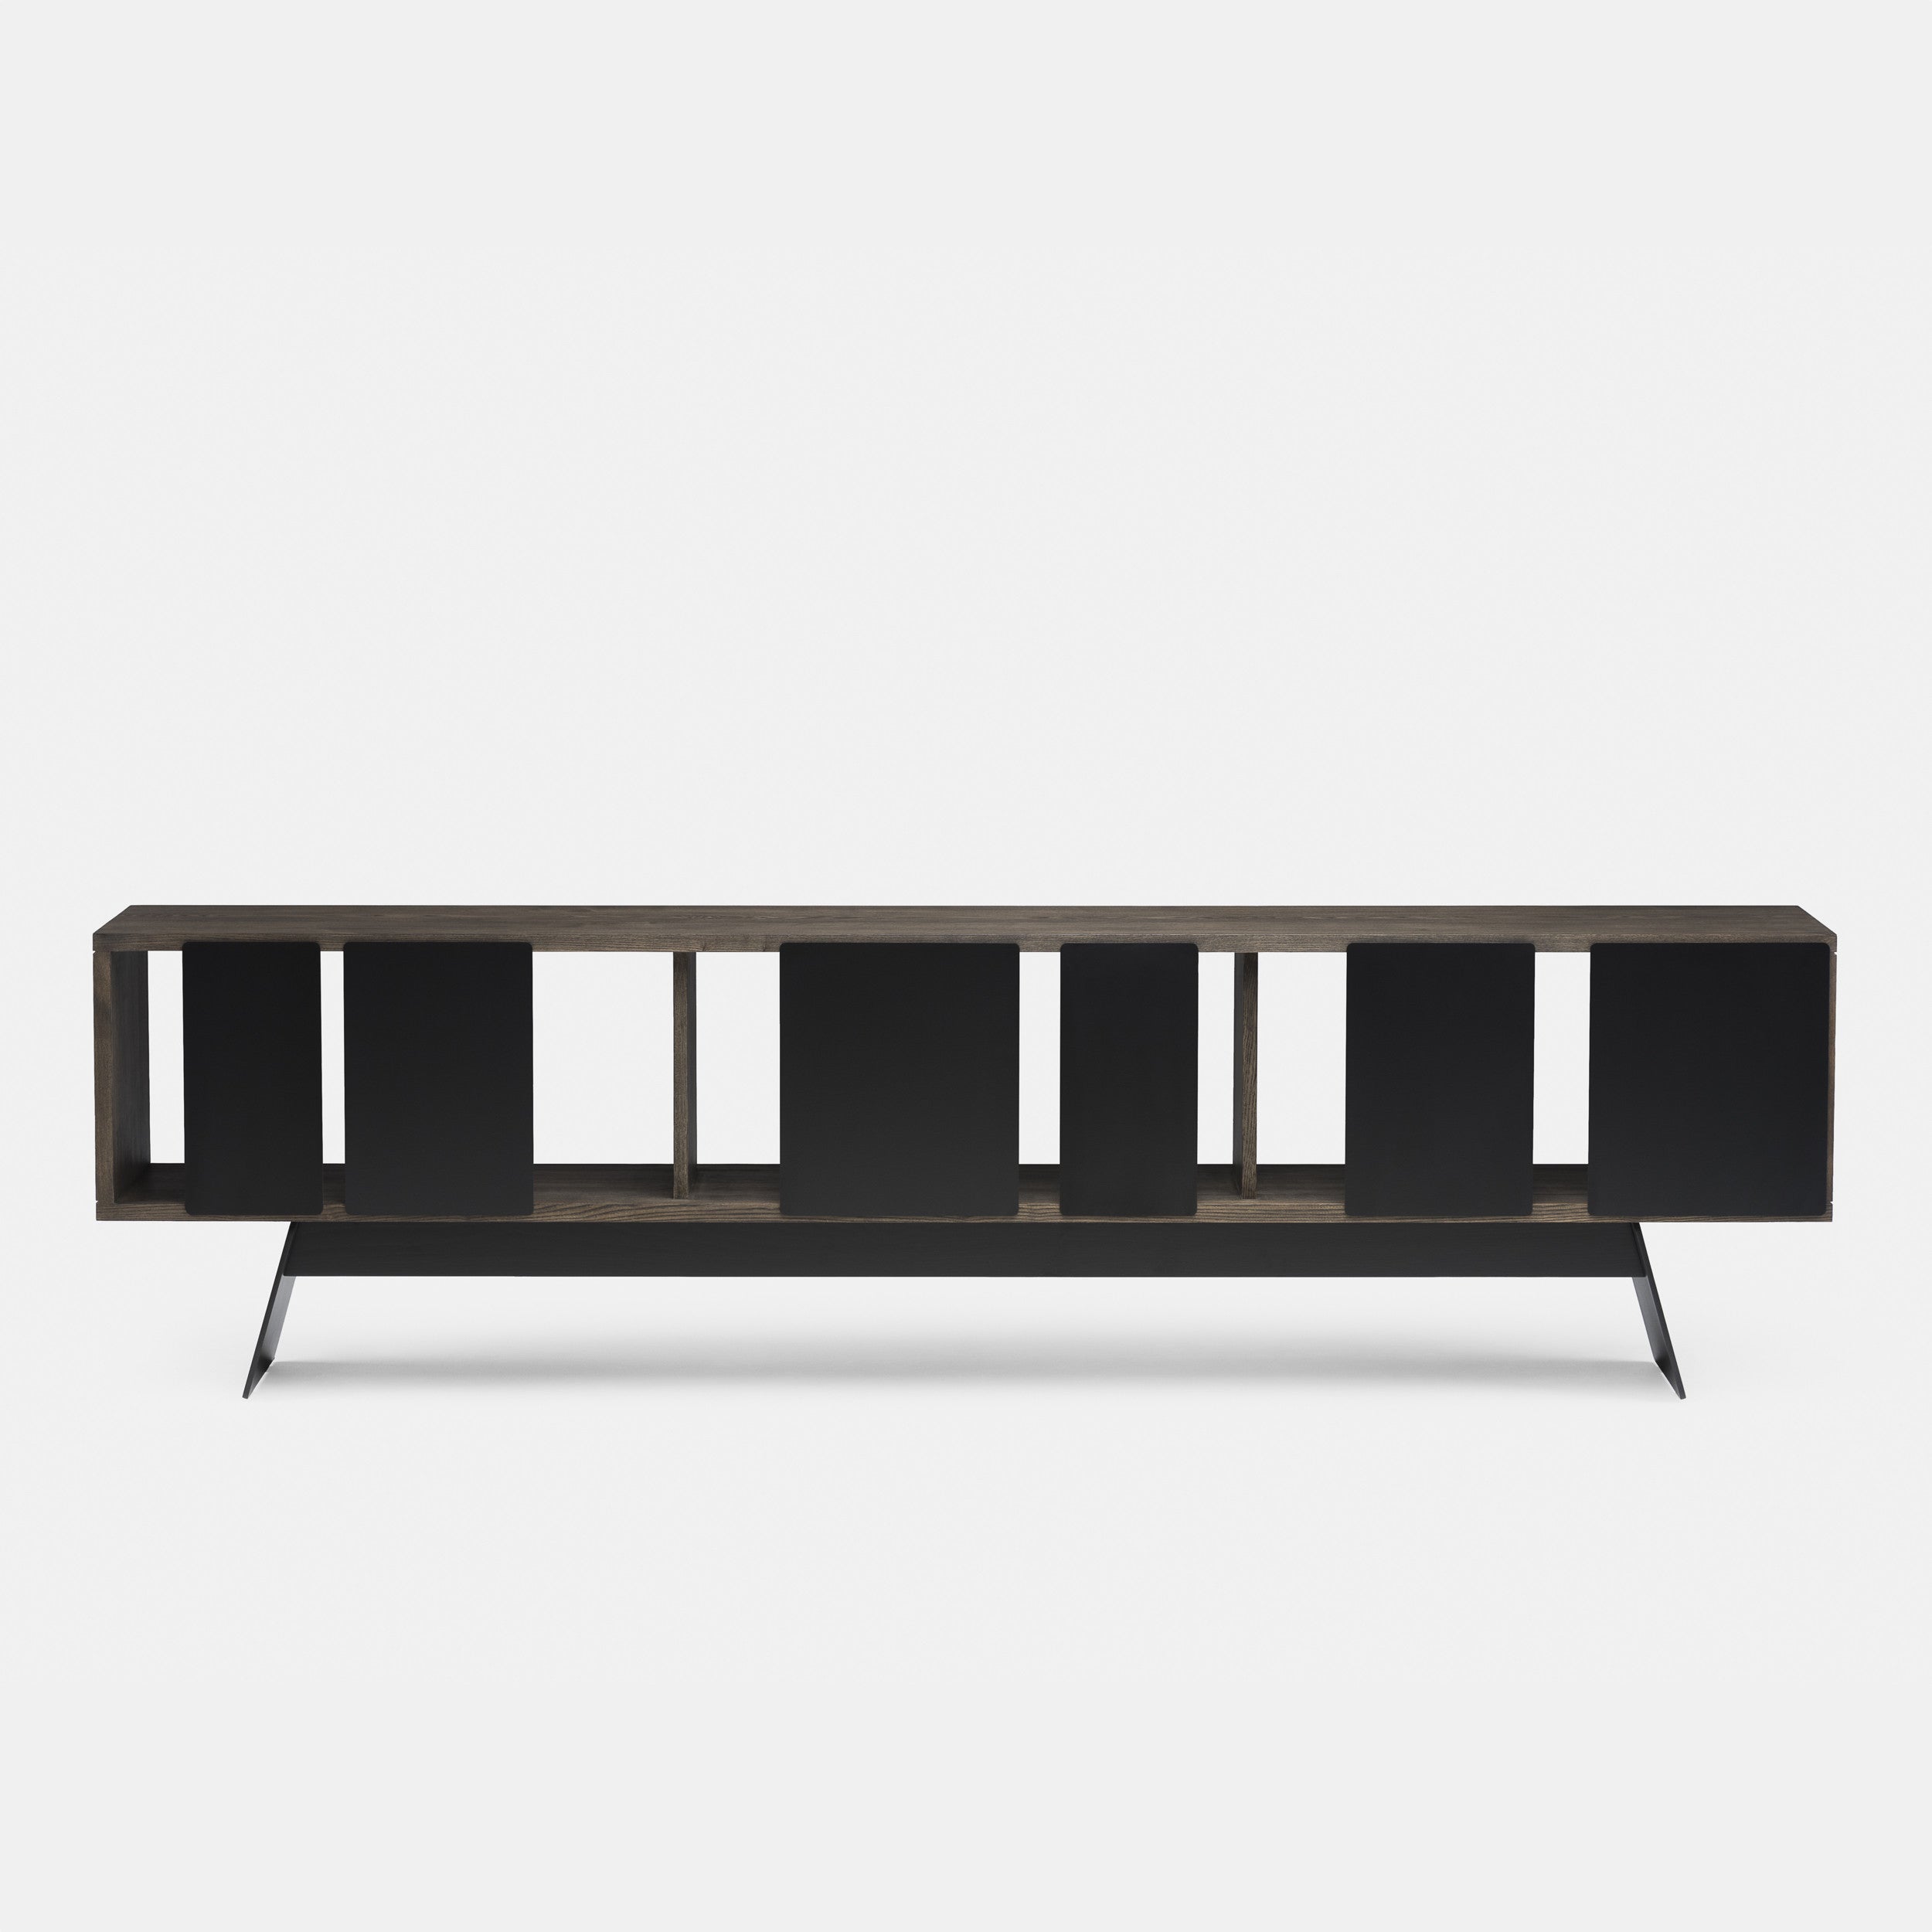 Different Trains Cabinet with Black Doors by Matthew Hilton